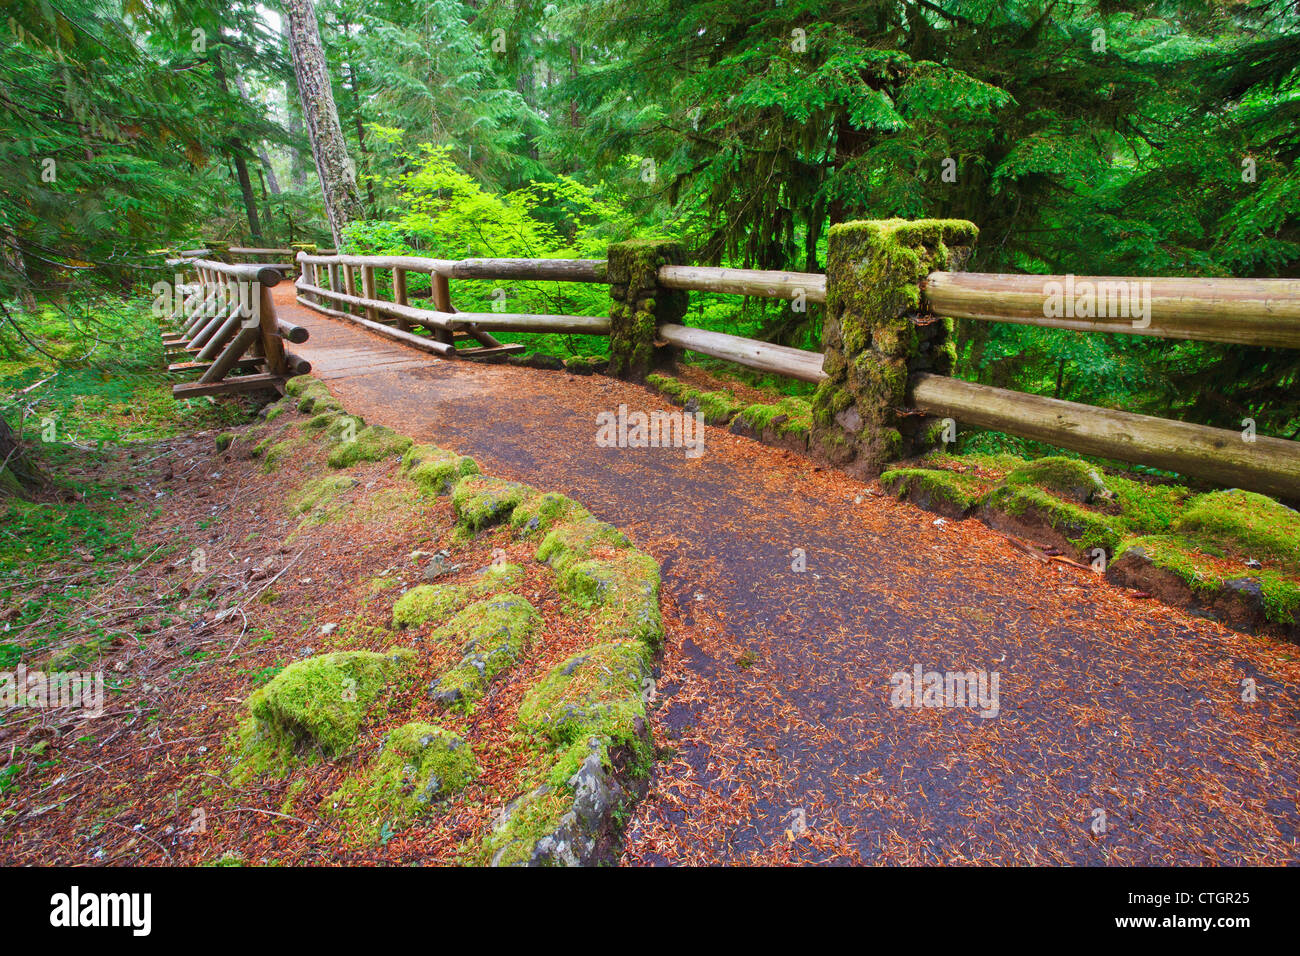 Trail To Sahalie Falls And Mckenzie River In Willamette National Forest; Oregon, United States of America Stock Photo